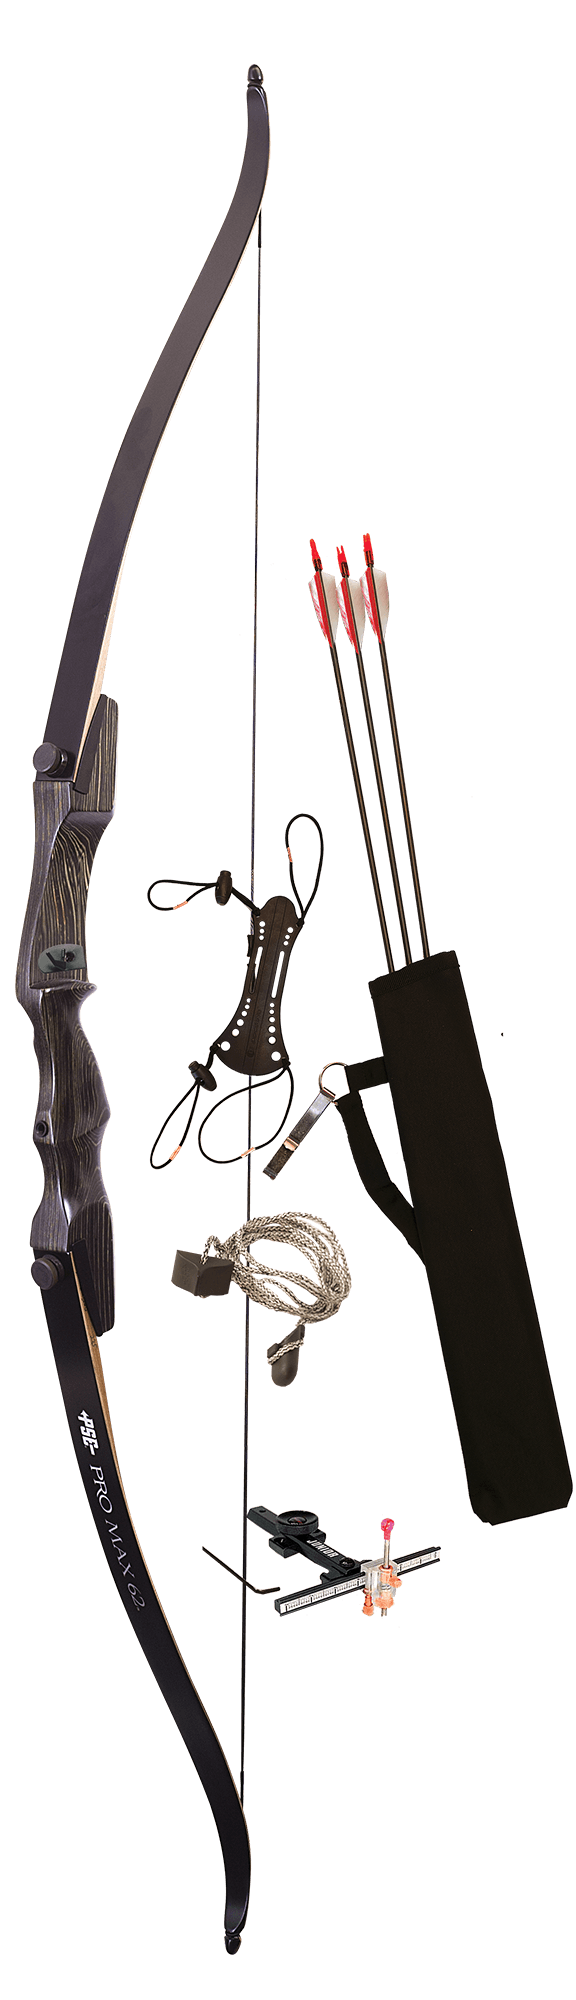 PSE Archery Pro Max 62 Traditional Recurve Bow Package - Leapfrog Outdoor Sports and Apparel